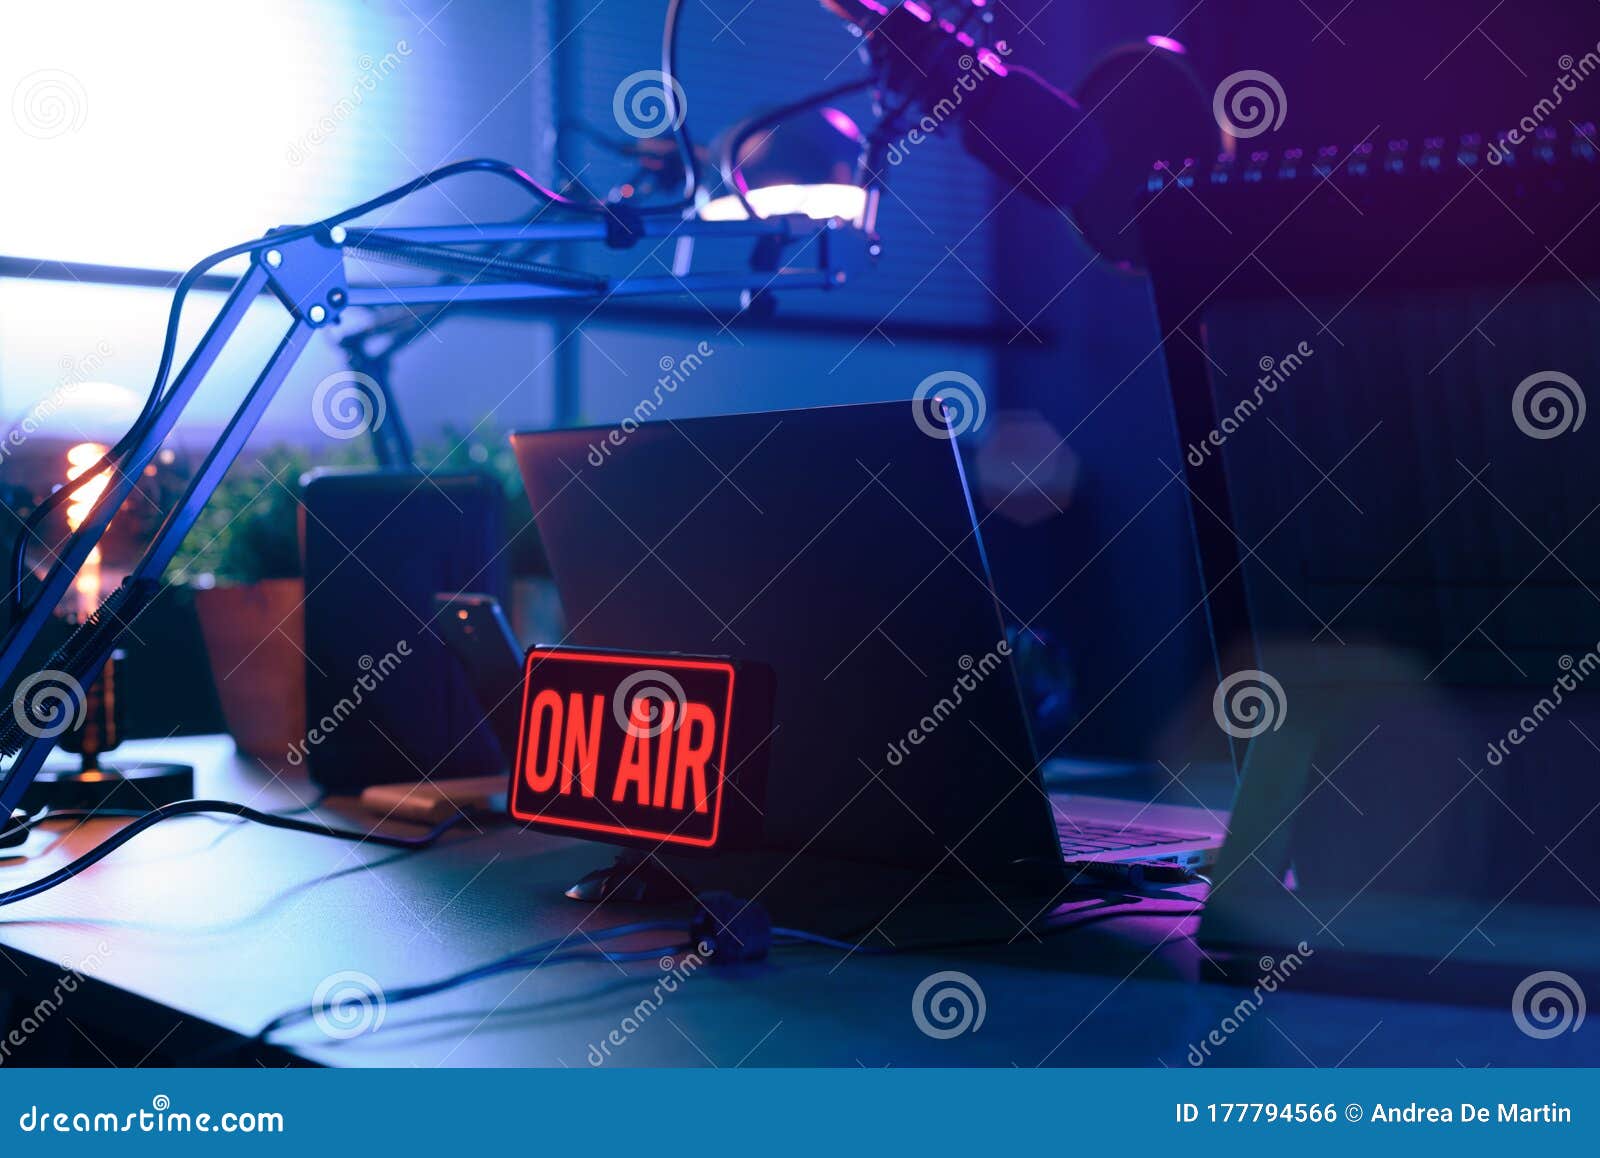 live online radio station with on air sign